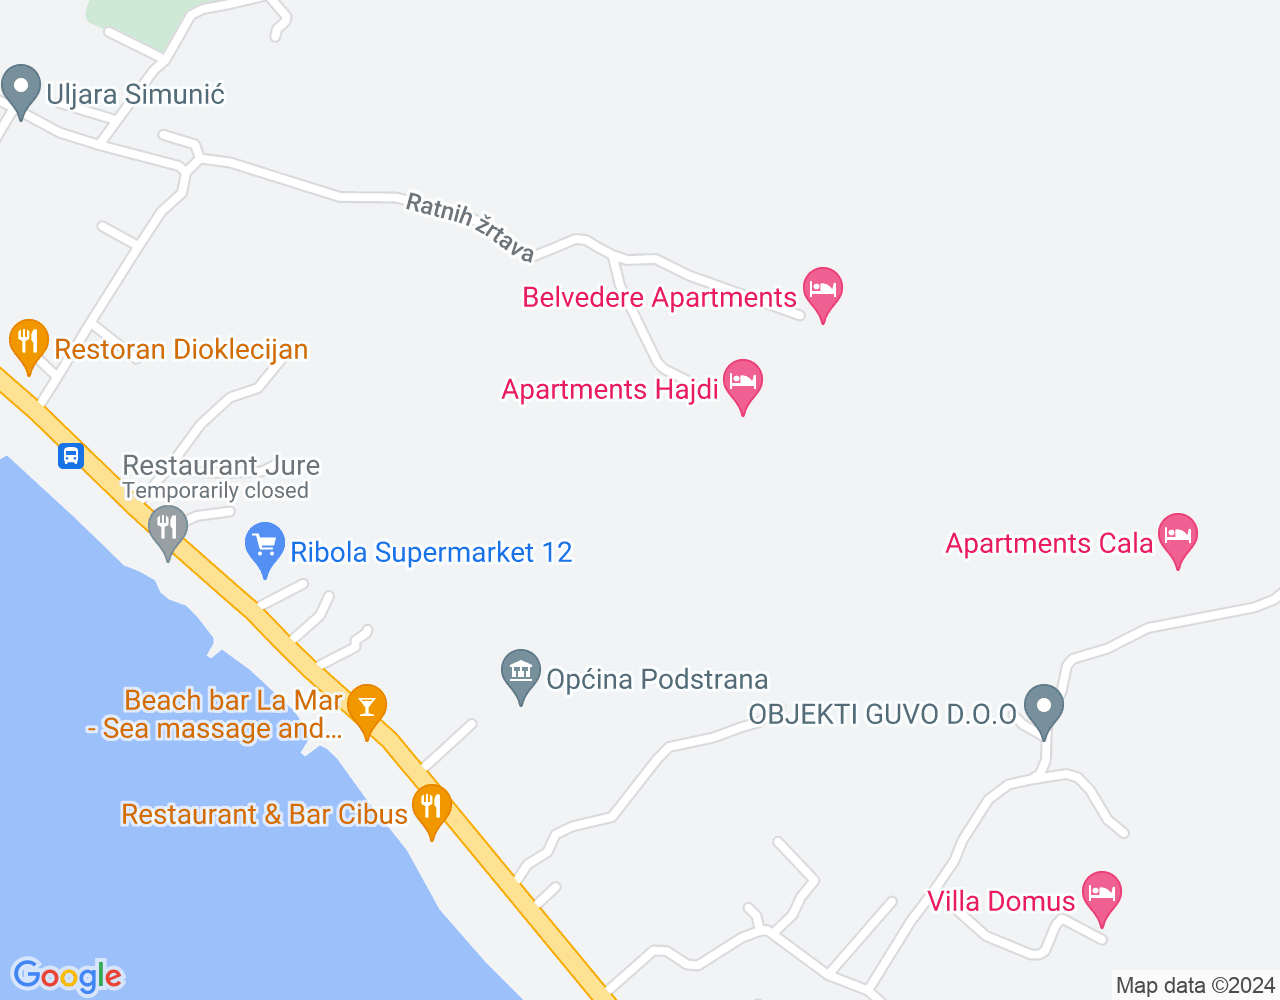 Beach, bars and restaurants are 10-15mins away by an easy walk. There are few markets and grocery shops (Ribola, Studenac, Tommy) 900 - 1000 meters from the apartment. - 43.48284 16.5608